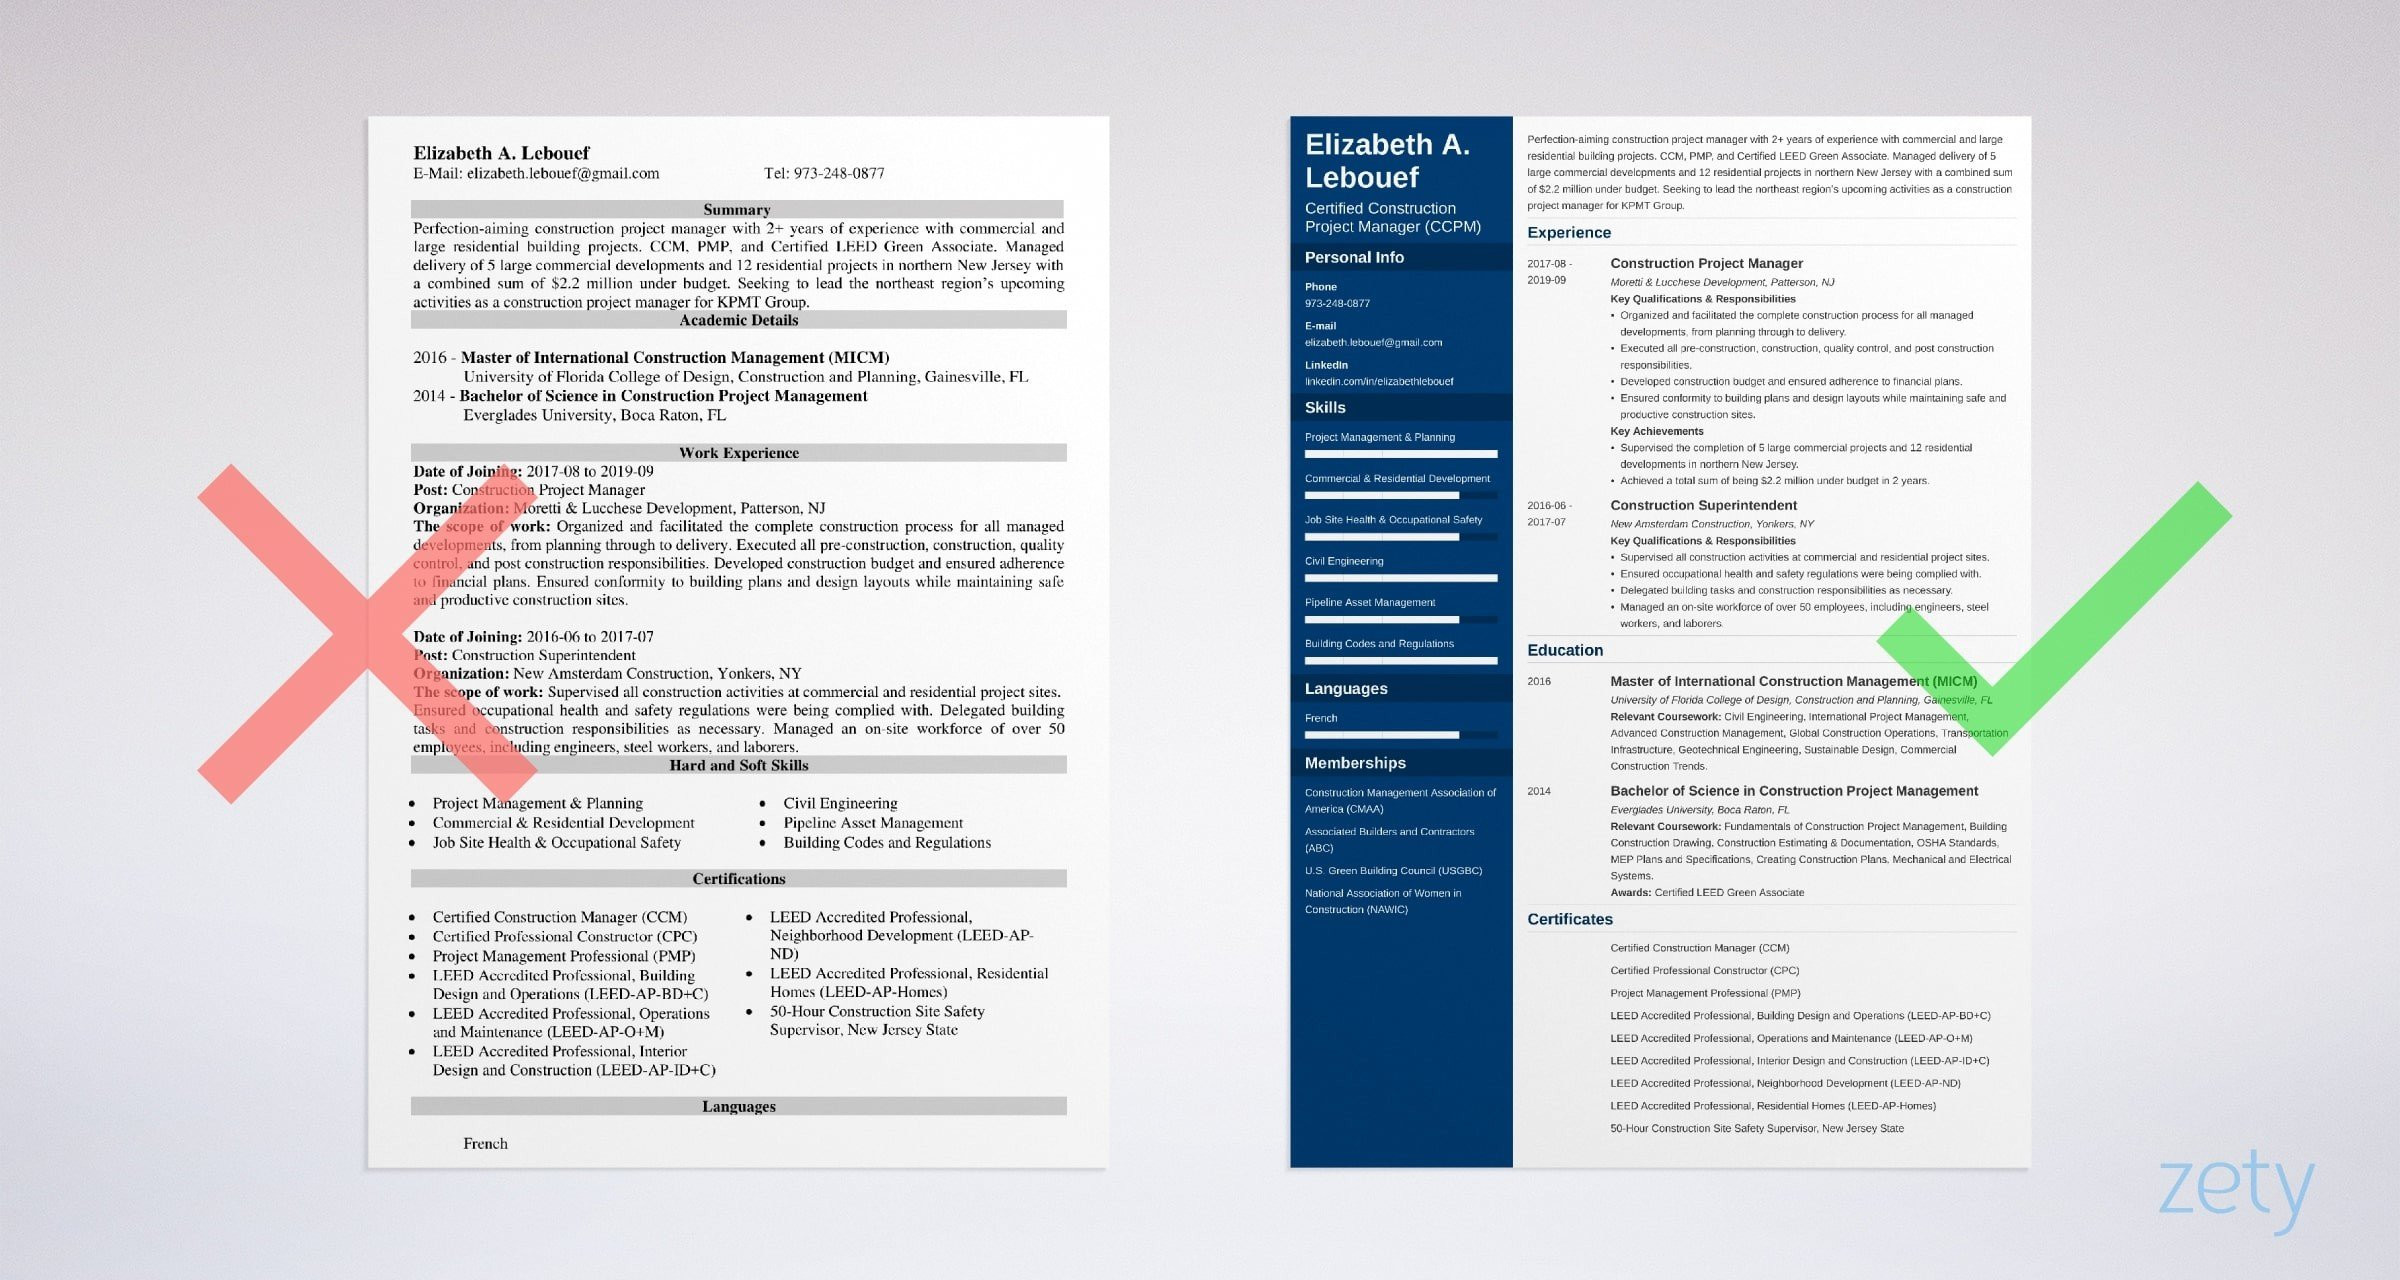 Free Resume Templates for Construction Project Manager Construction Project Manager Resume Examples & Guide